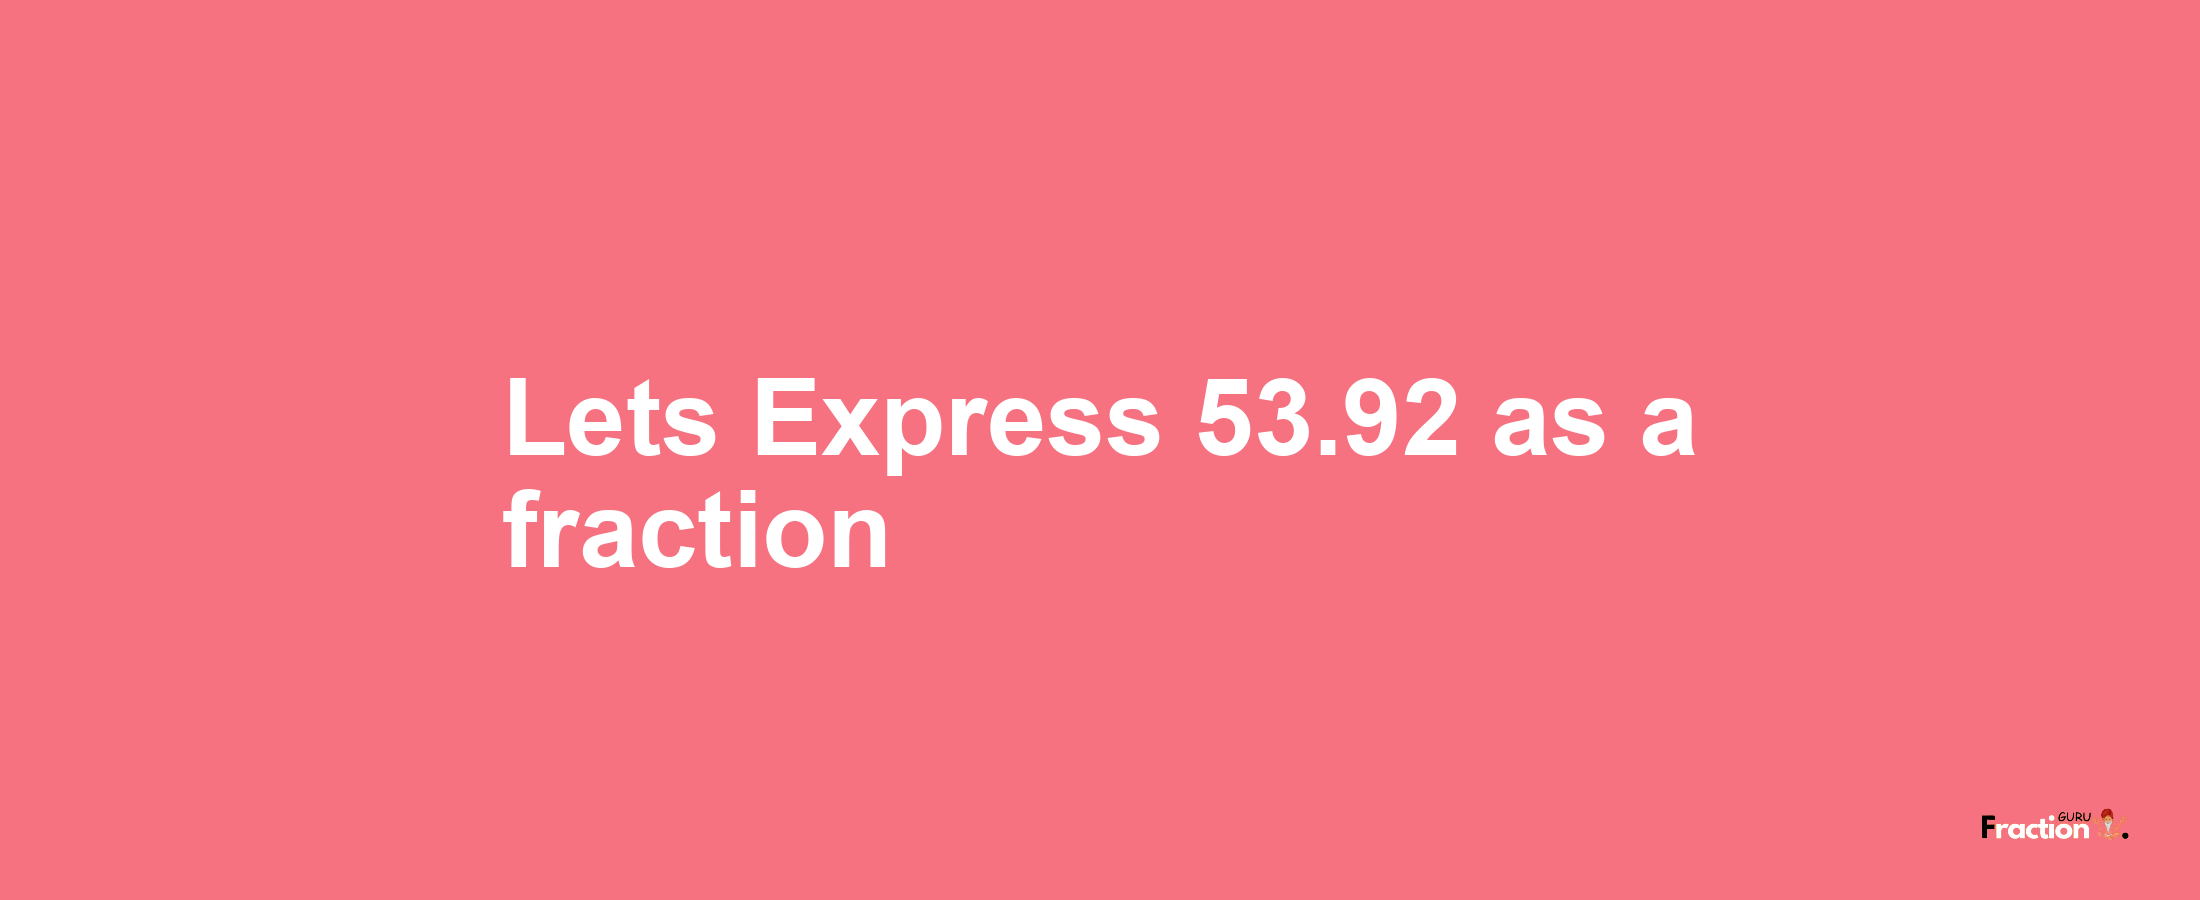 Lets Express 53.92 as afraction